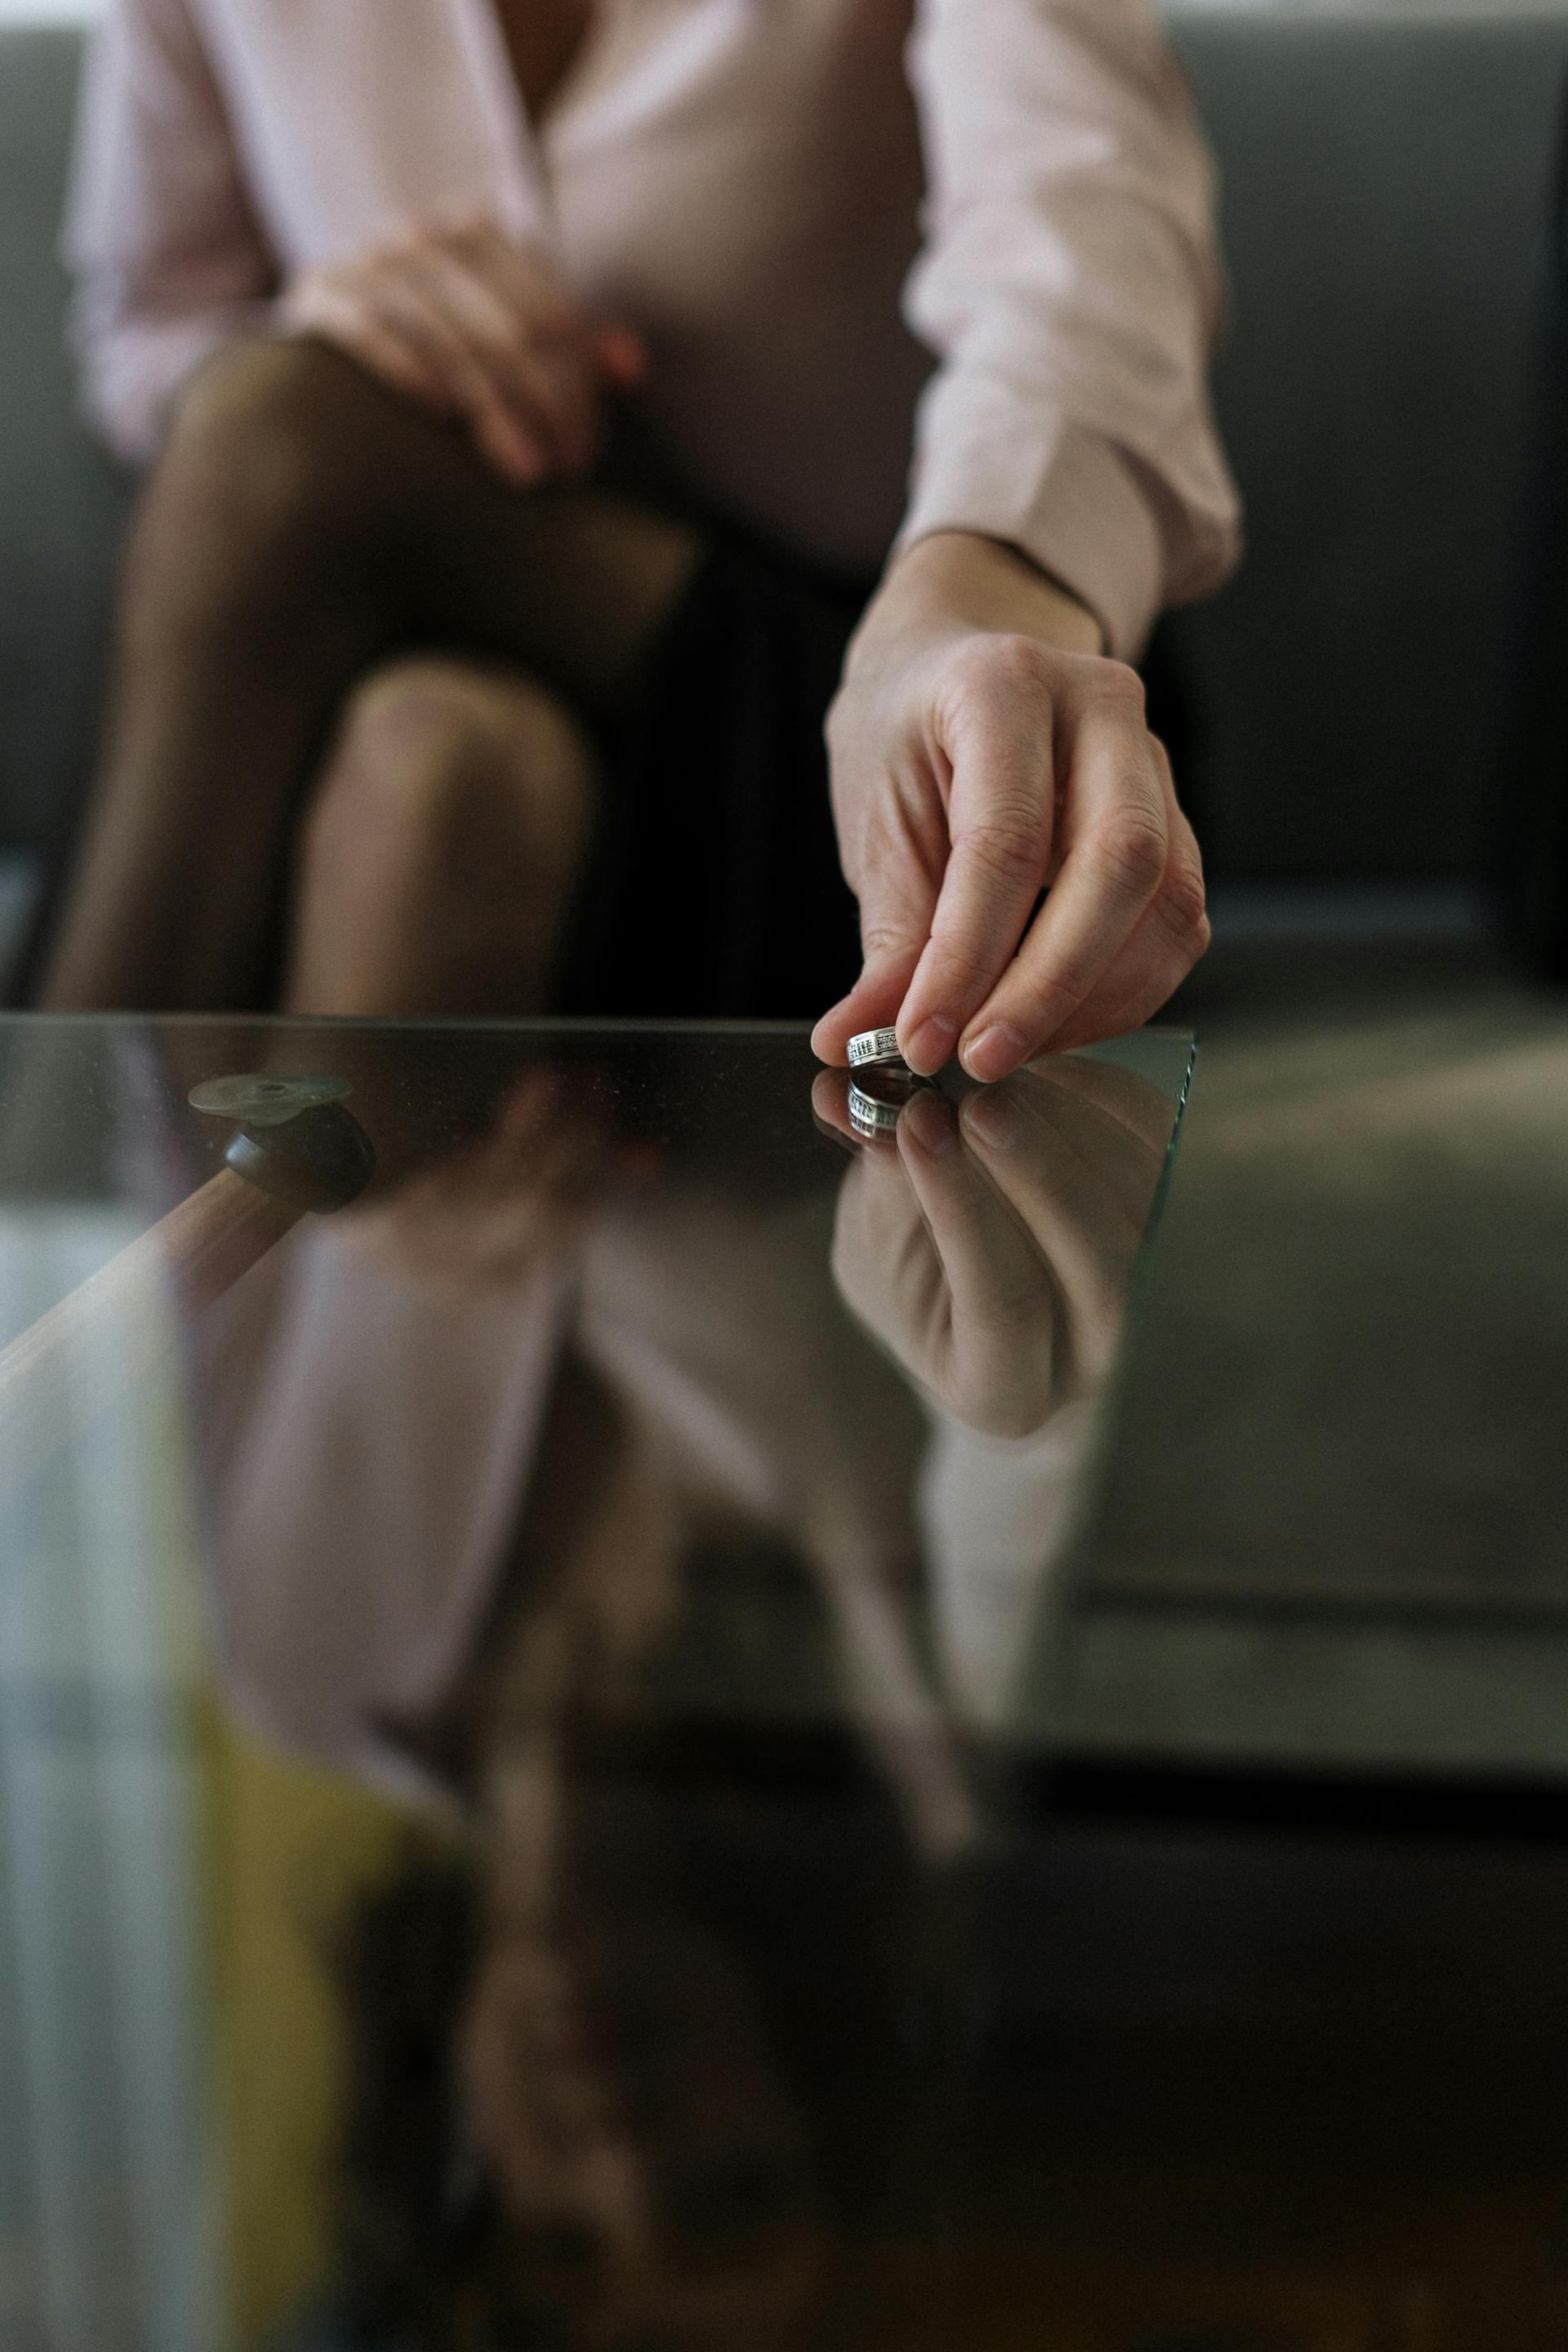 Woman placing her wedding ring on the table | Source: Pexels